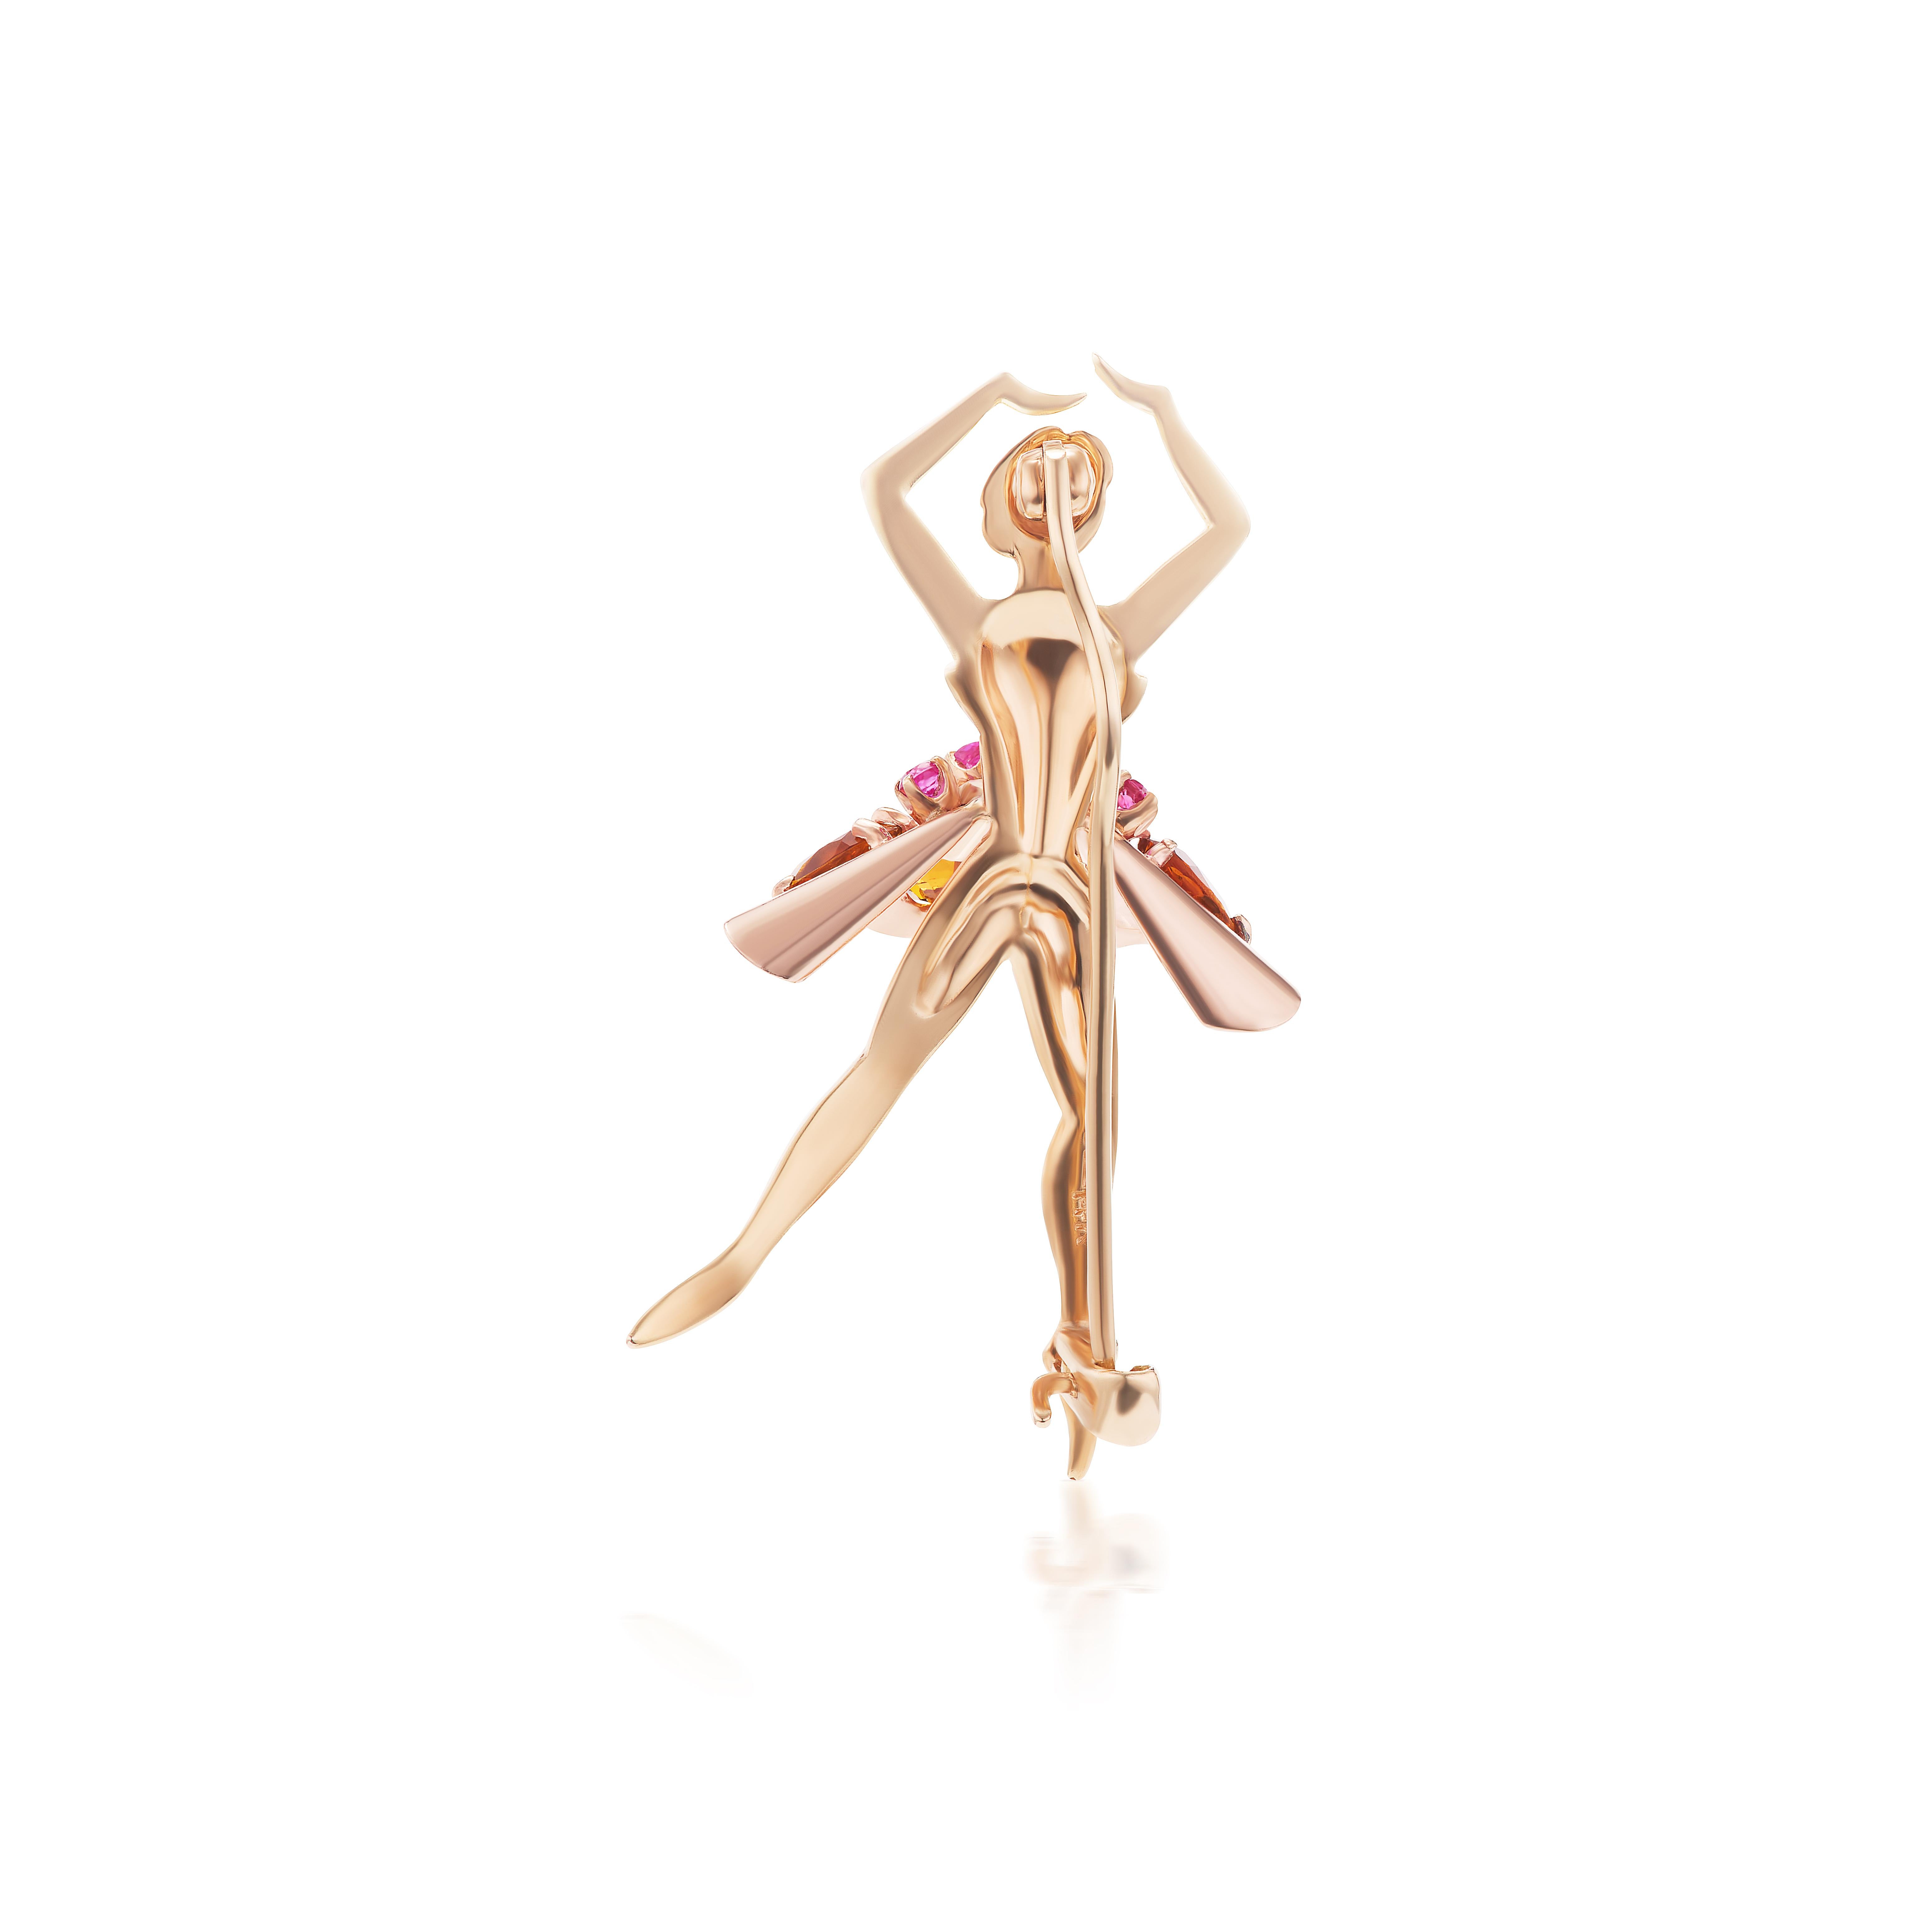 Lovely and sweet leaping ballerina design featuring oval citrines and round rubies in 14K gold. The poetry of motion captured by the dancer's dress and raised arms in this brooch will be a fine accent to your ensemble for many occasions. 